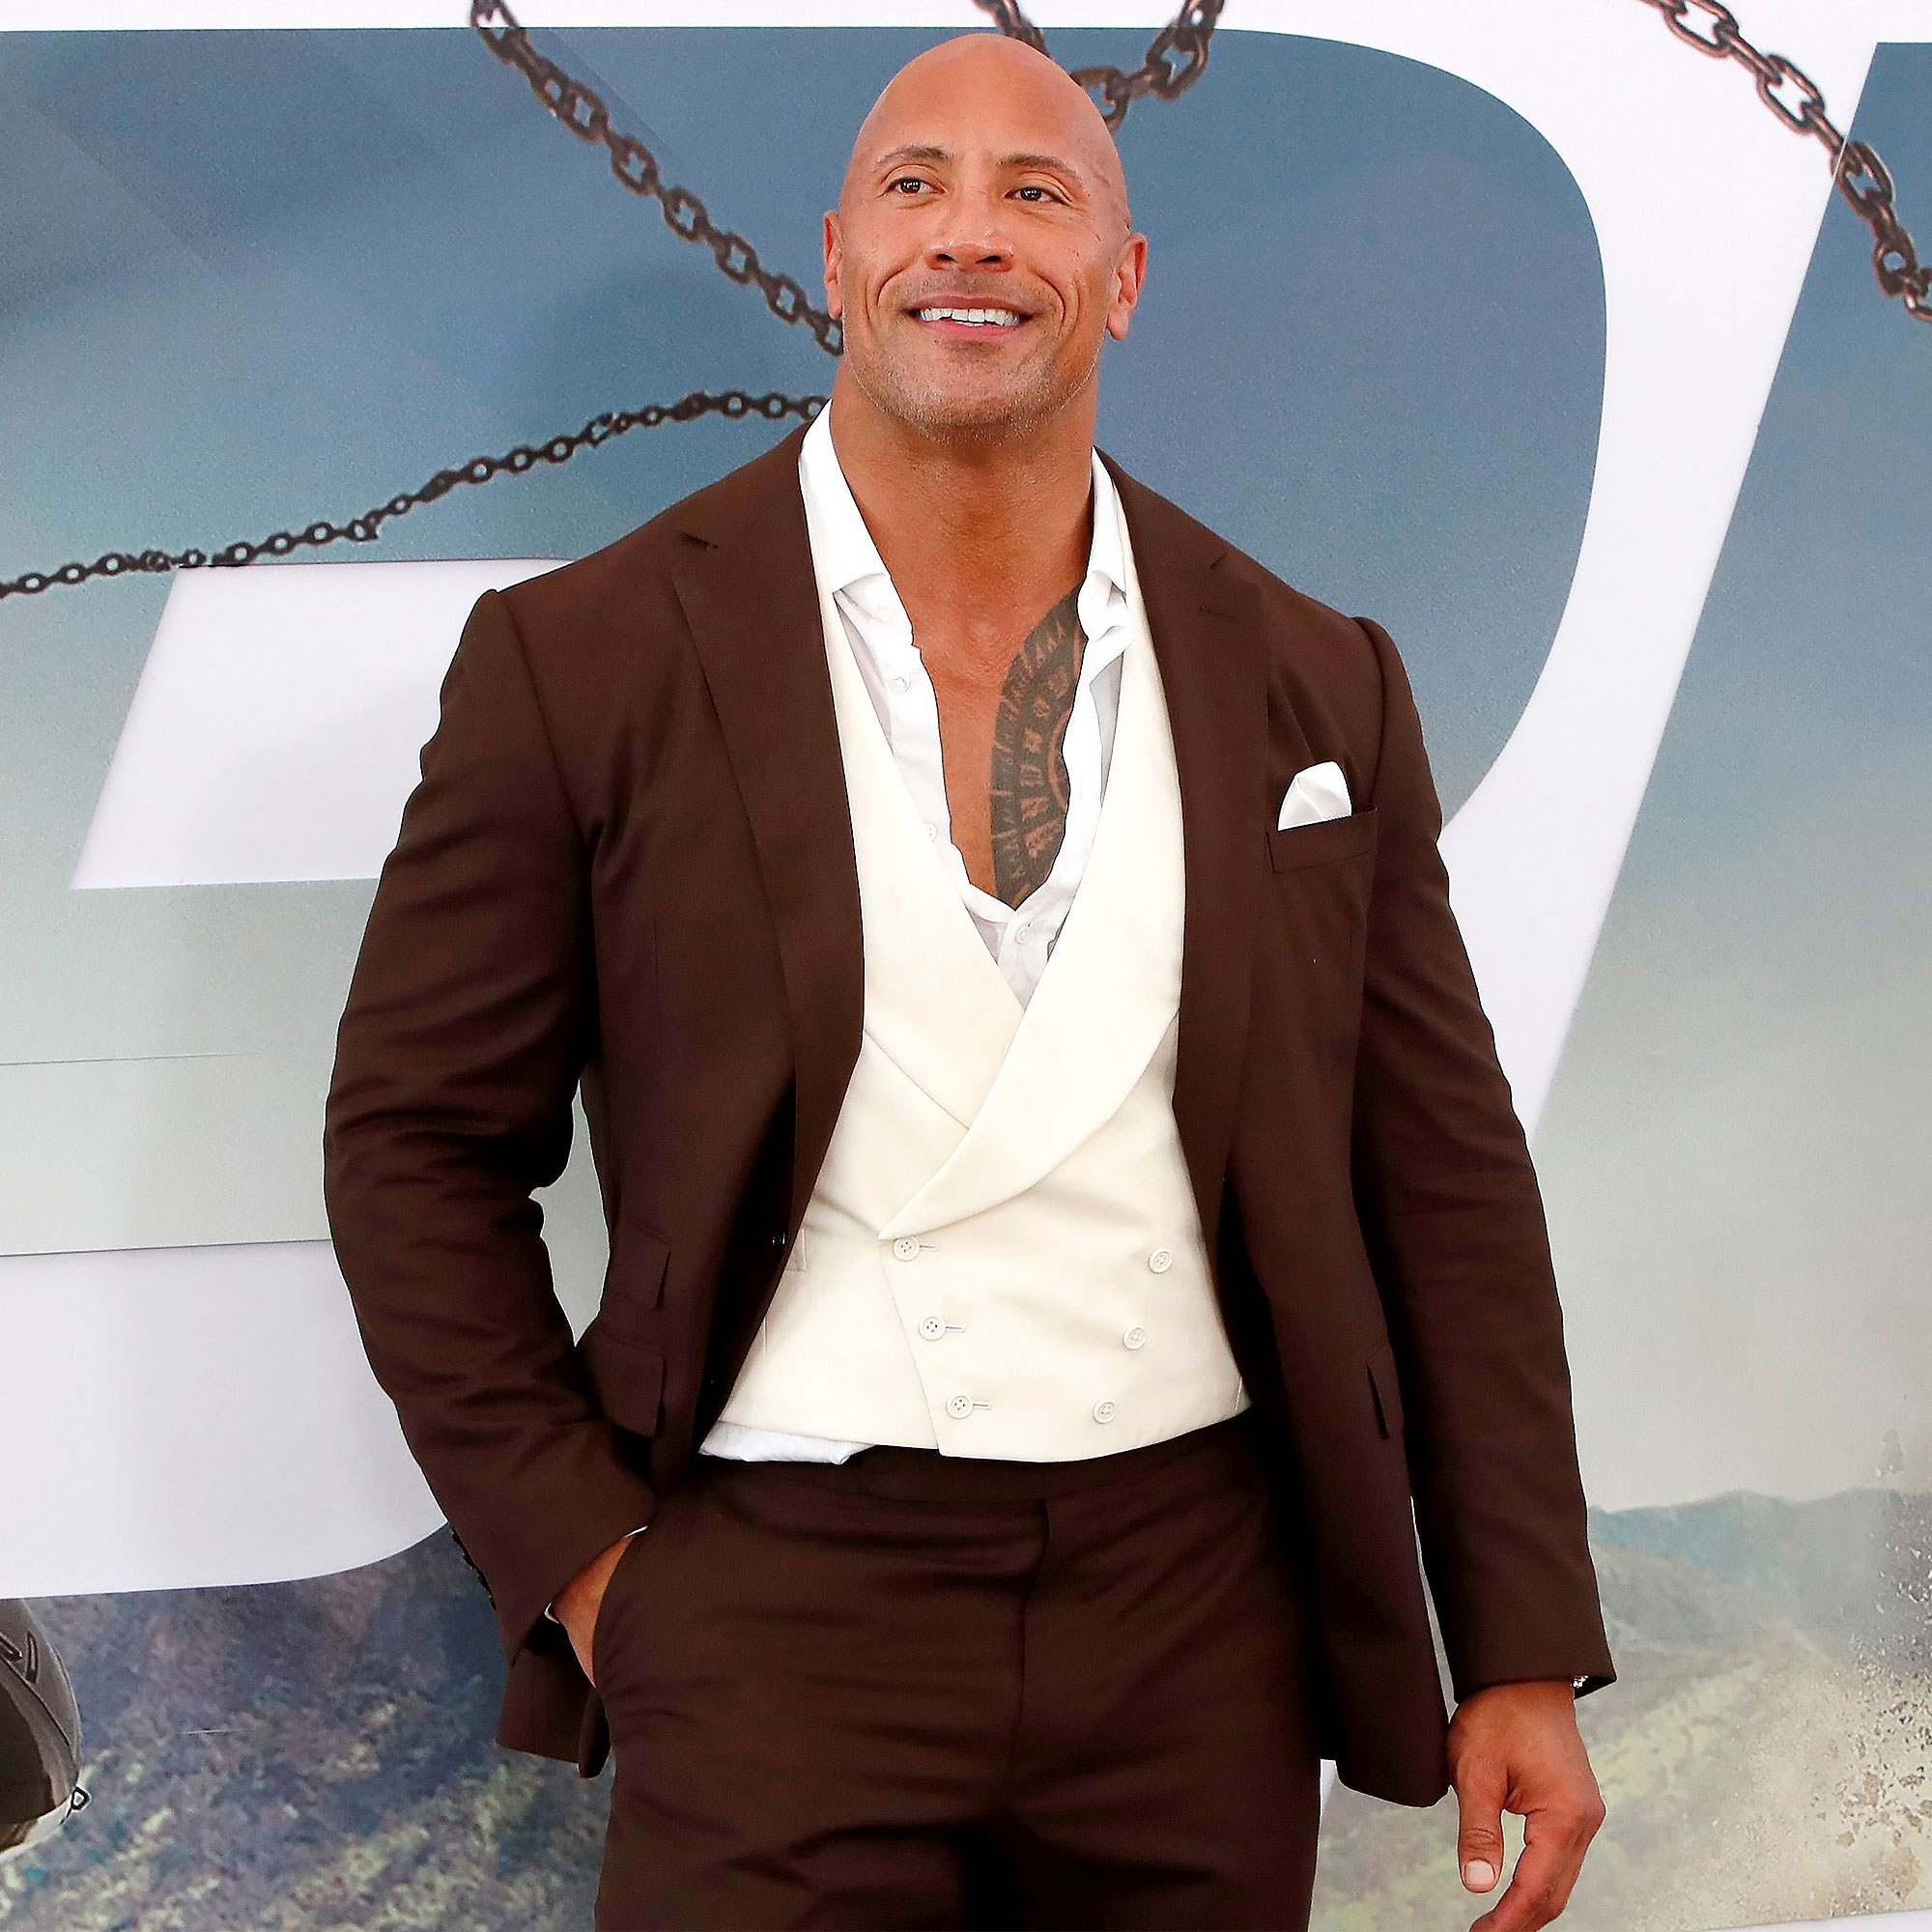 Fast and Furious 10': Everything We Know So Far